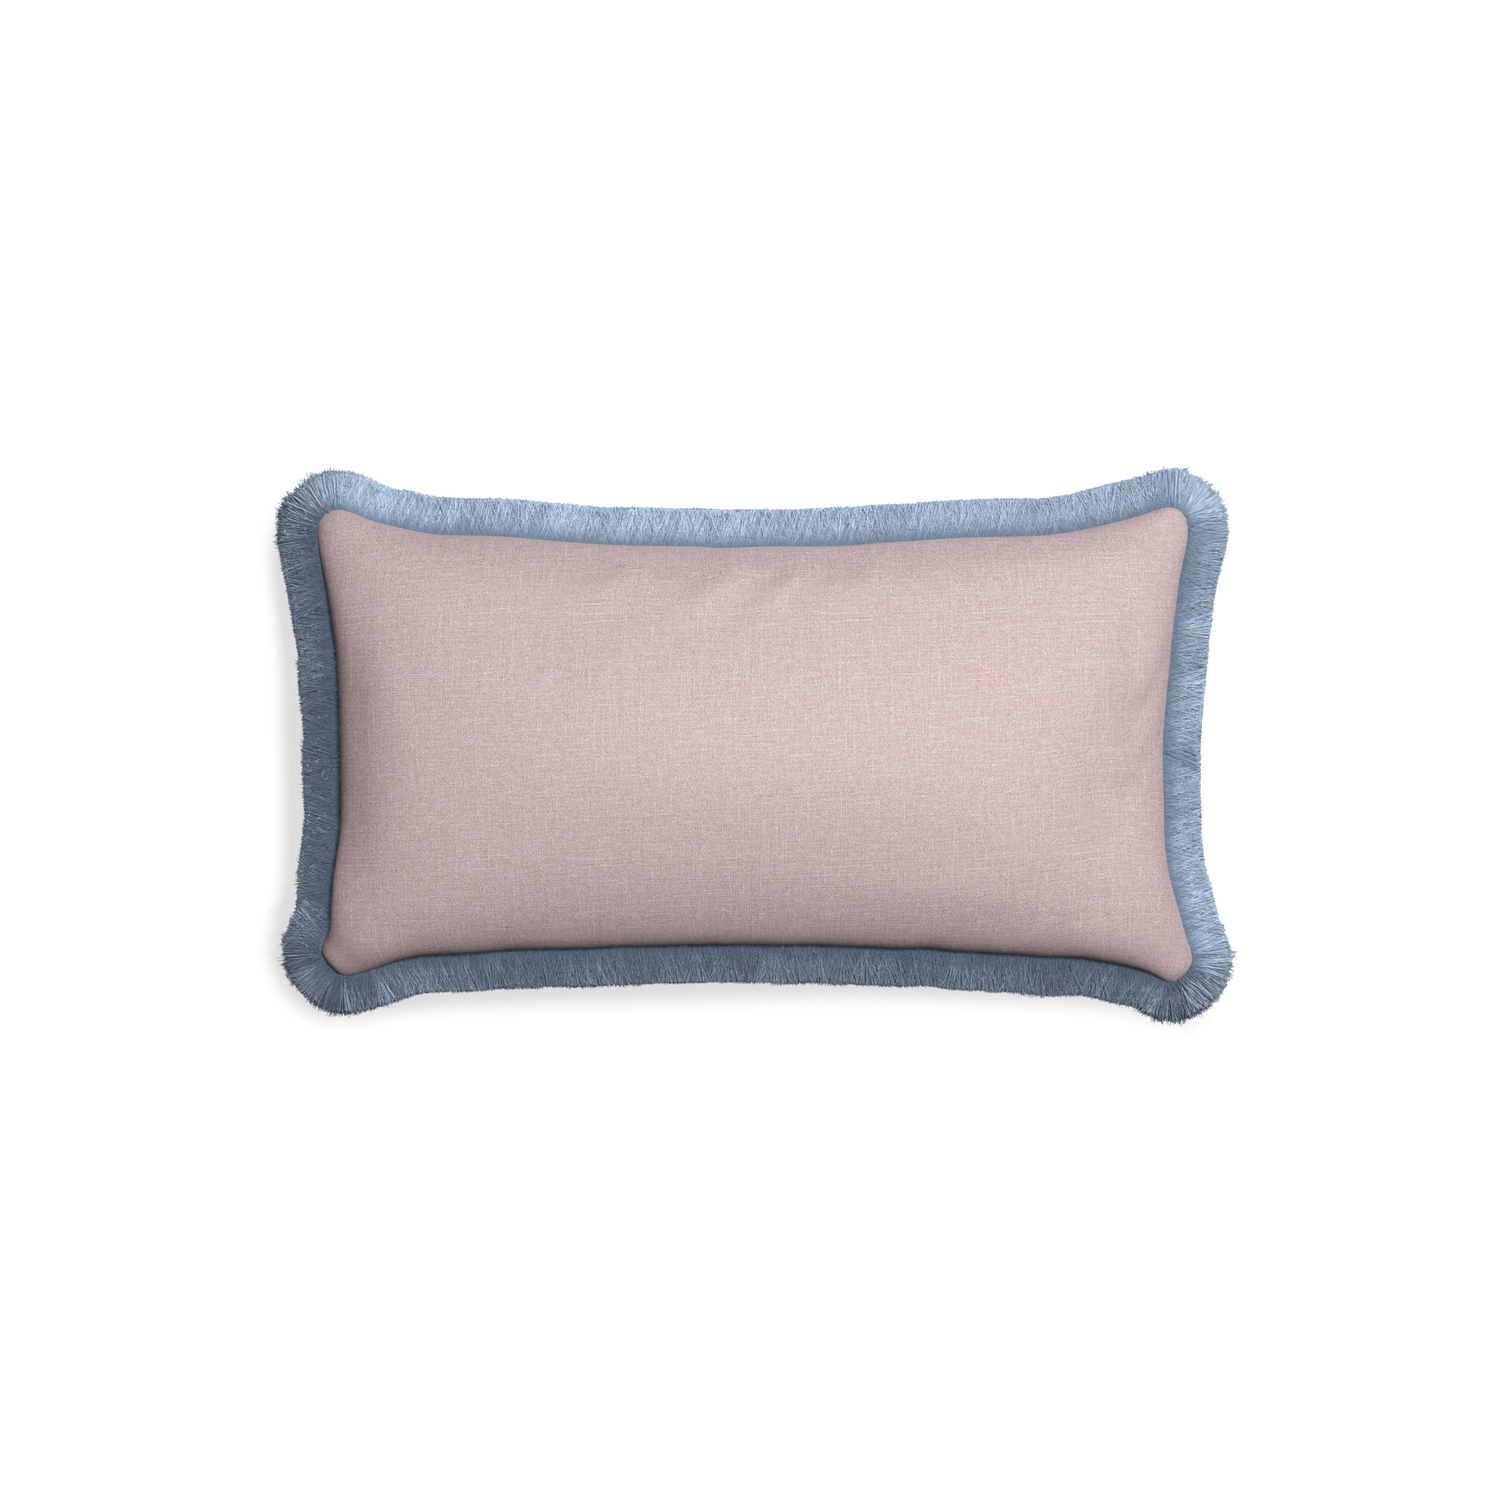 Petite-lumbar orchid custom mauve pinkpillow with sky fringe on white background